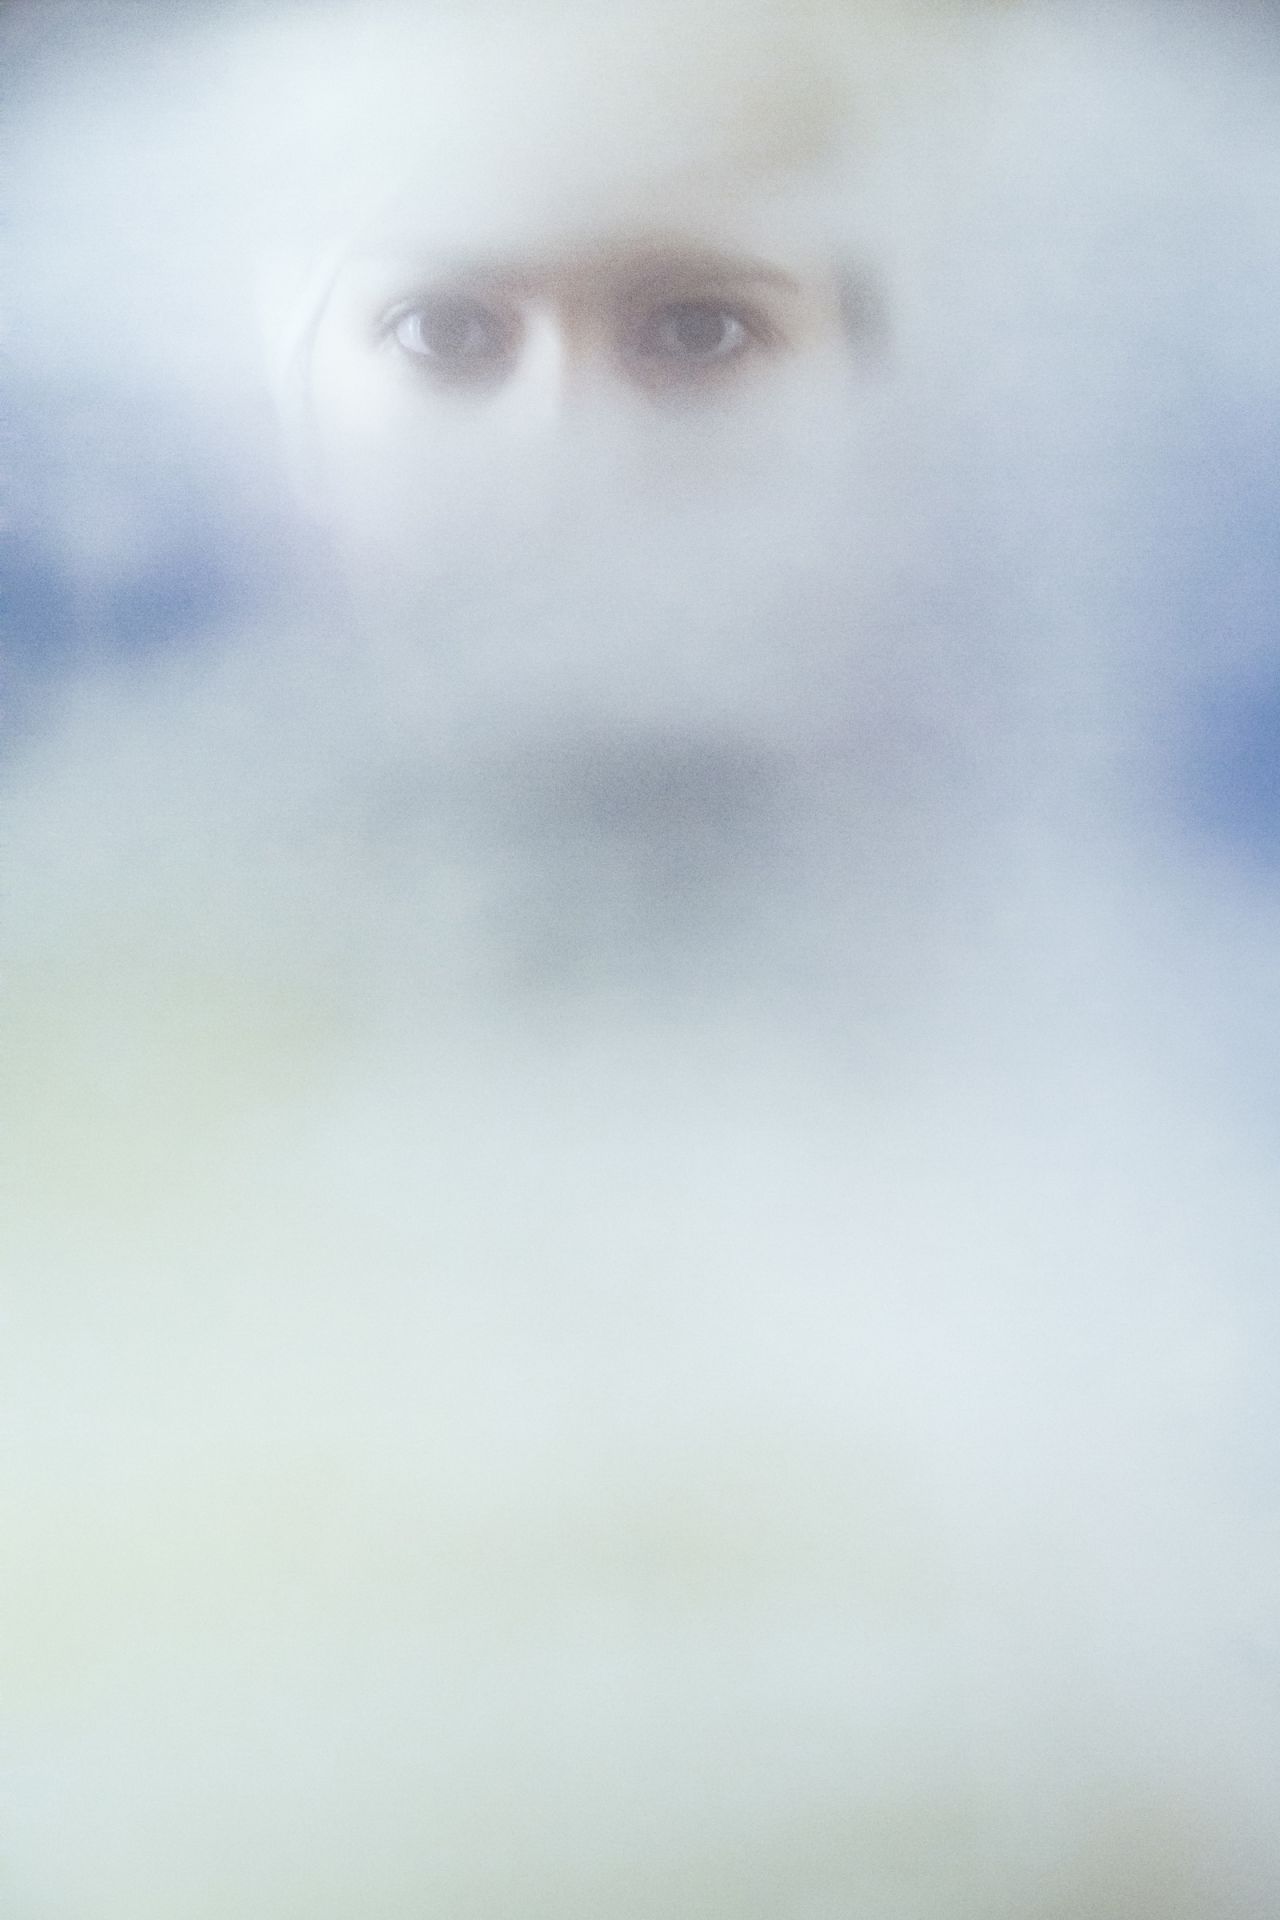 Of this  self portrait, Camilla Ferrari wrote, "In steam clouds after having a shower. As the days go by, I increasingly feel the need to pay more attention to my way of clothing in the house and my self care, as I would if I needed to go out and work."